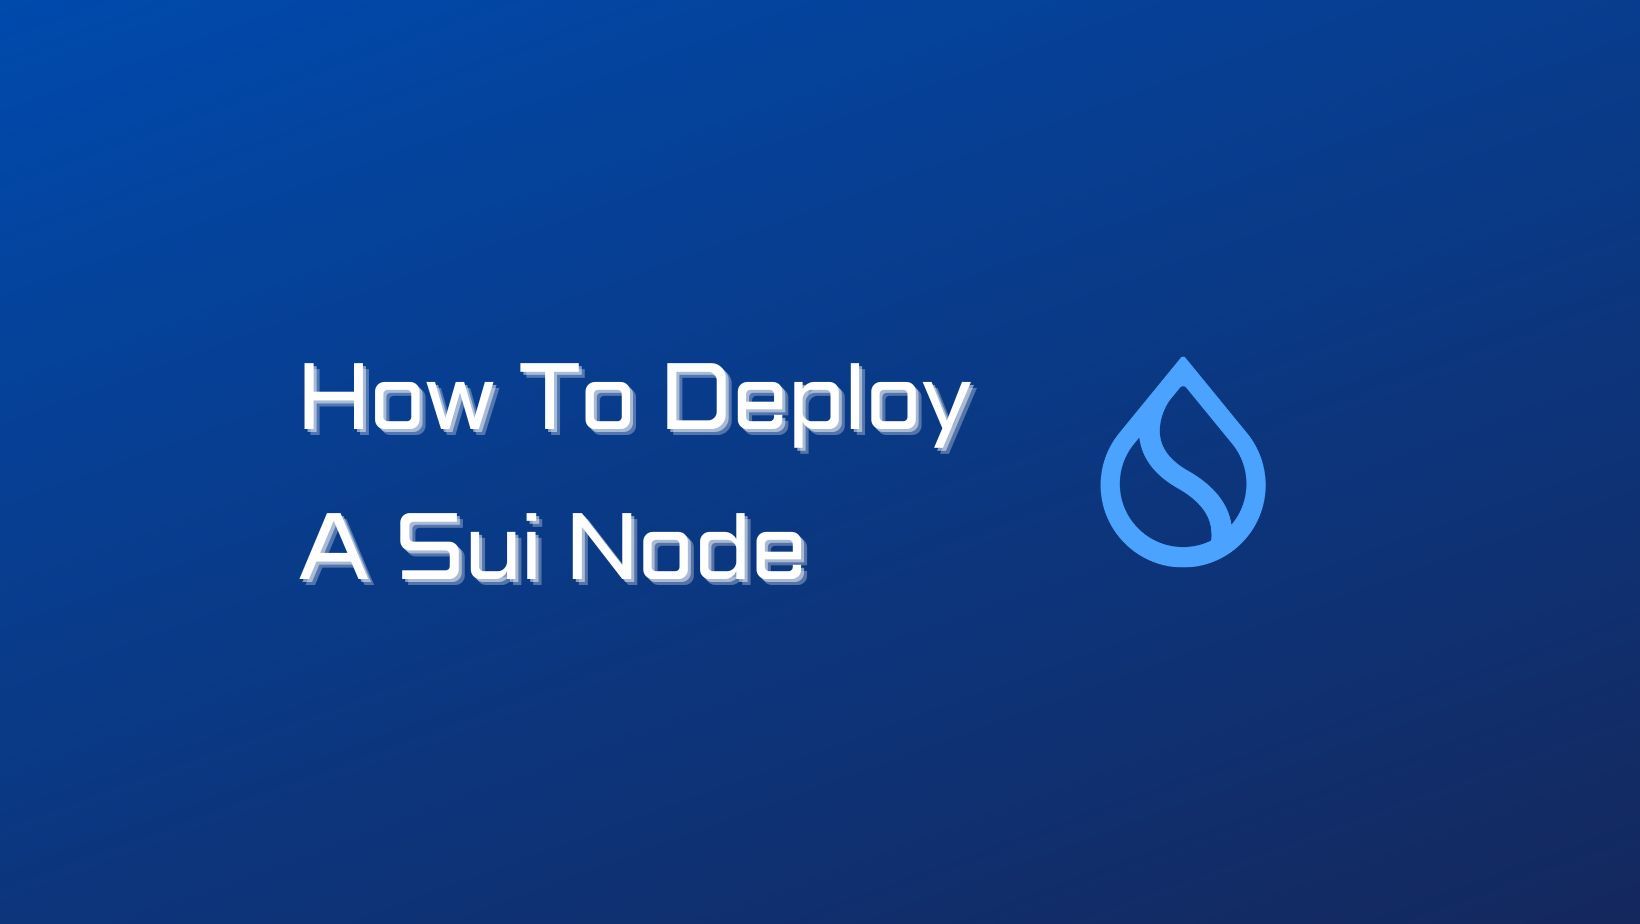 How to Deploy a Sui Node